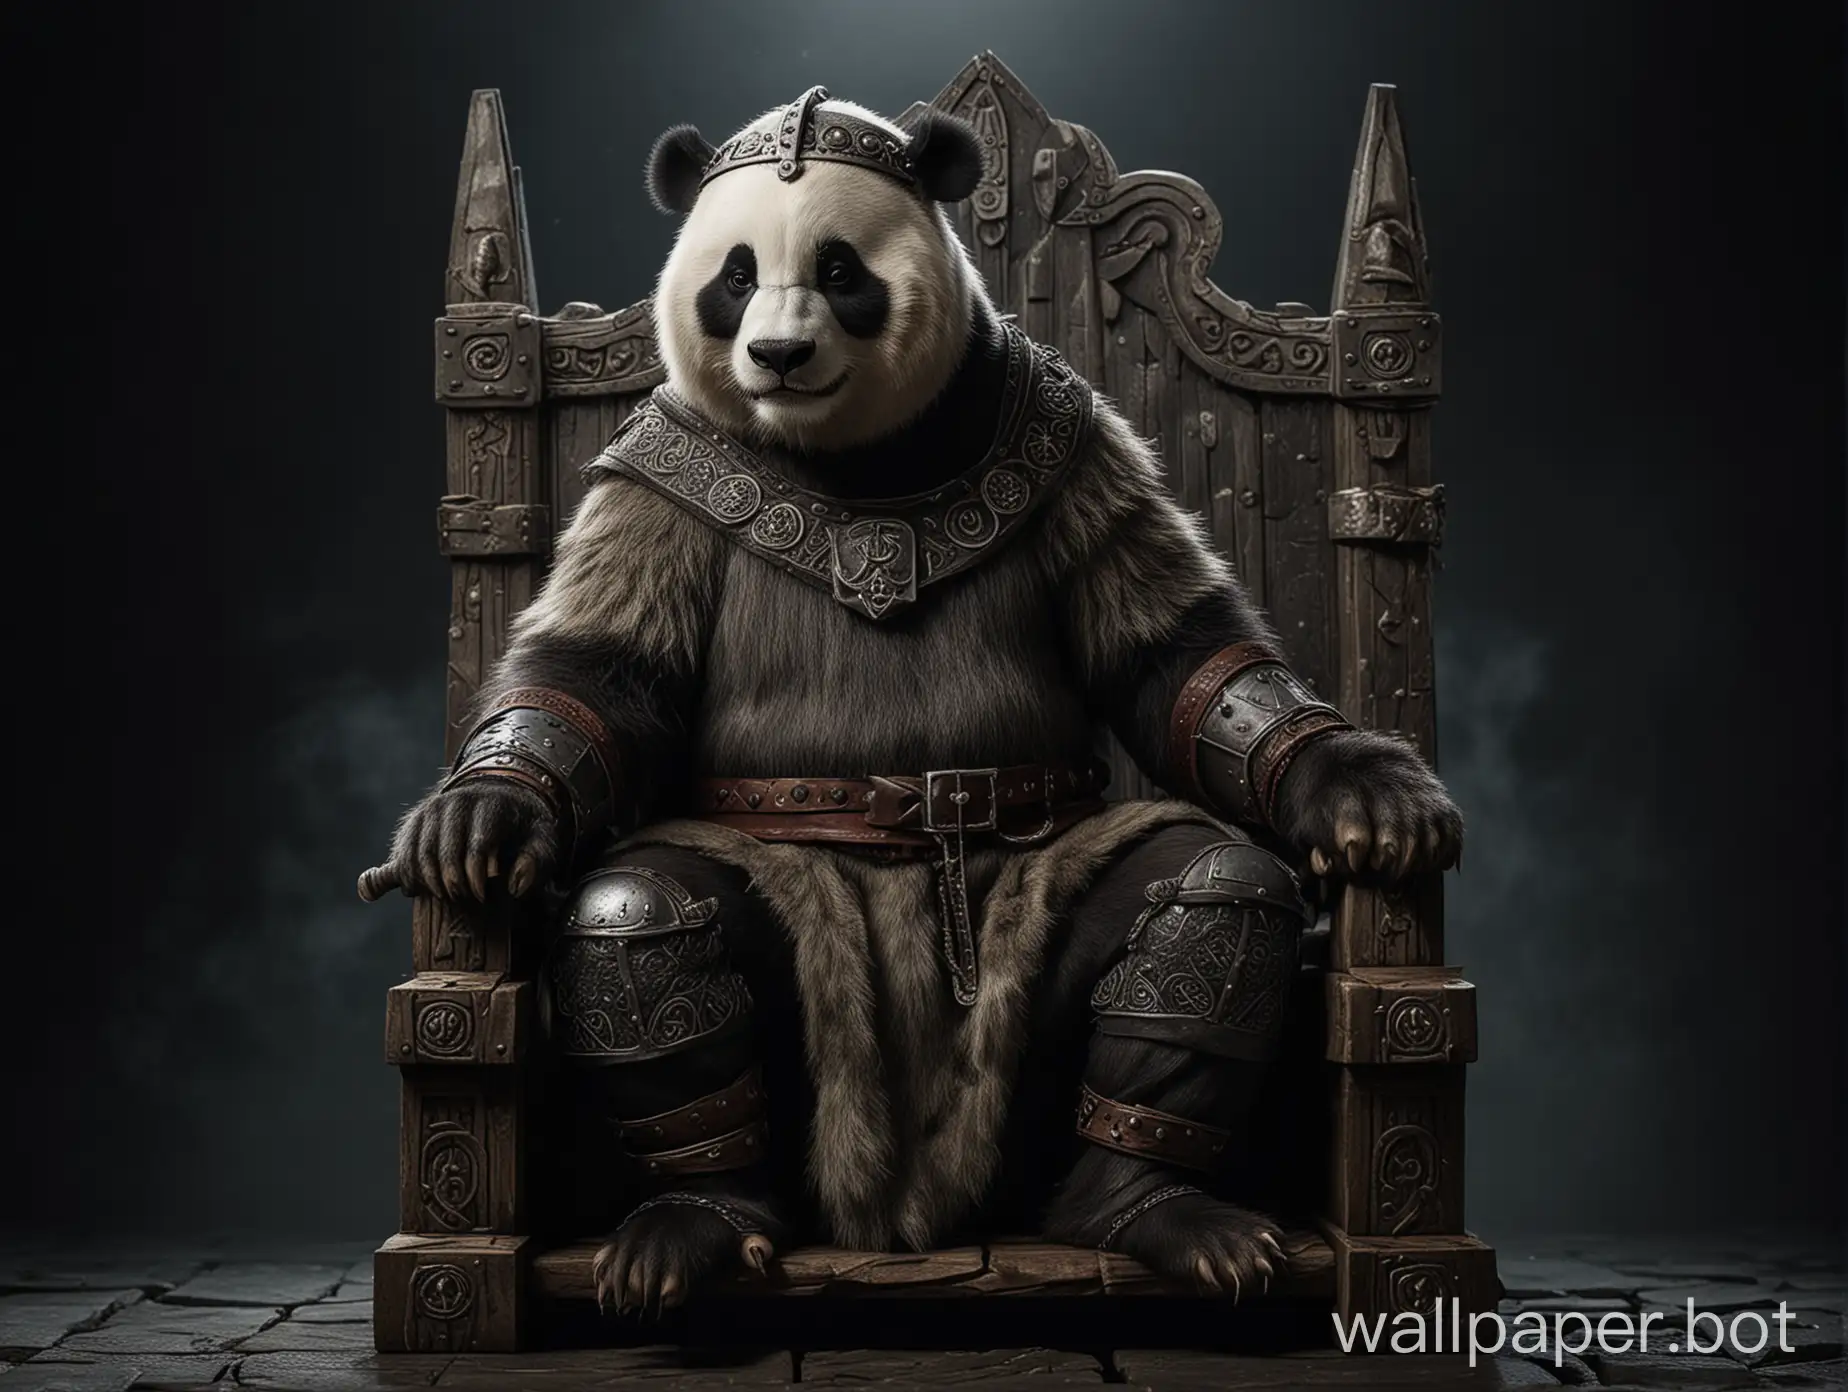 A Viking panda sitting on a throne with a dark background